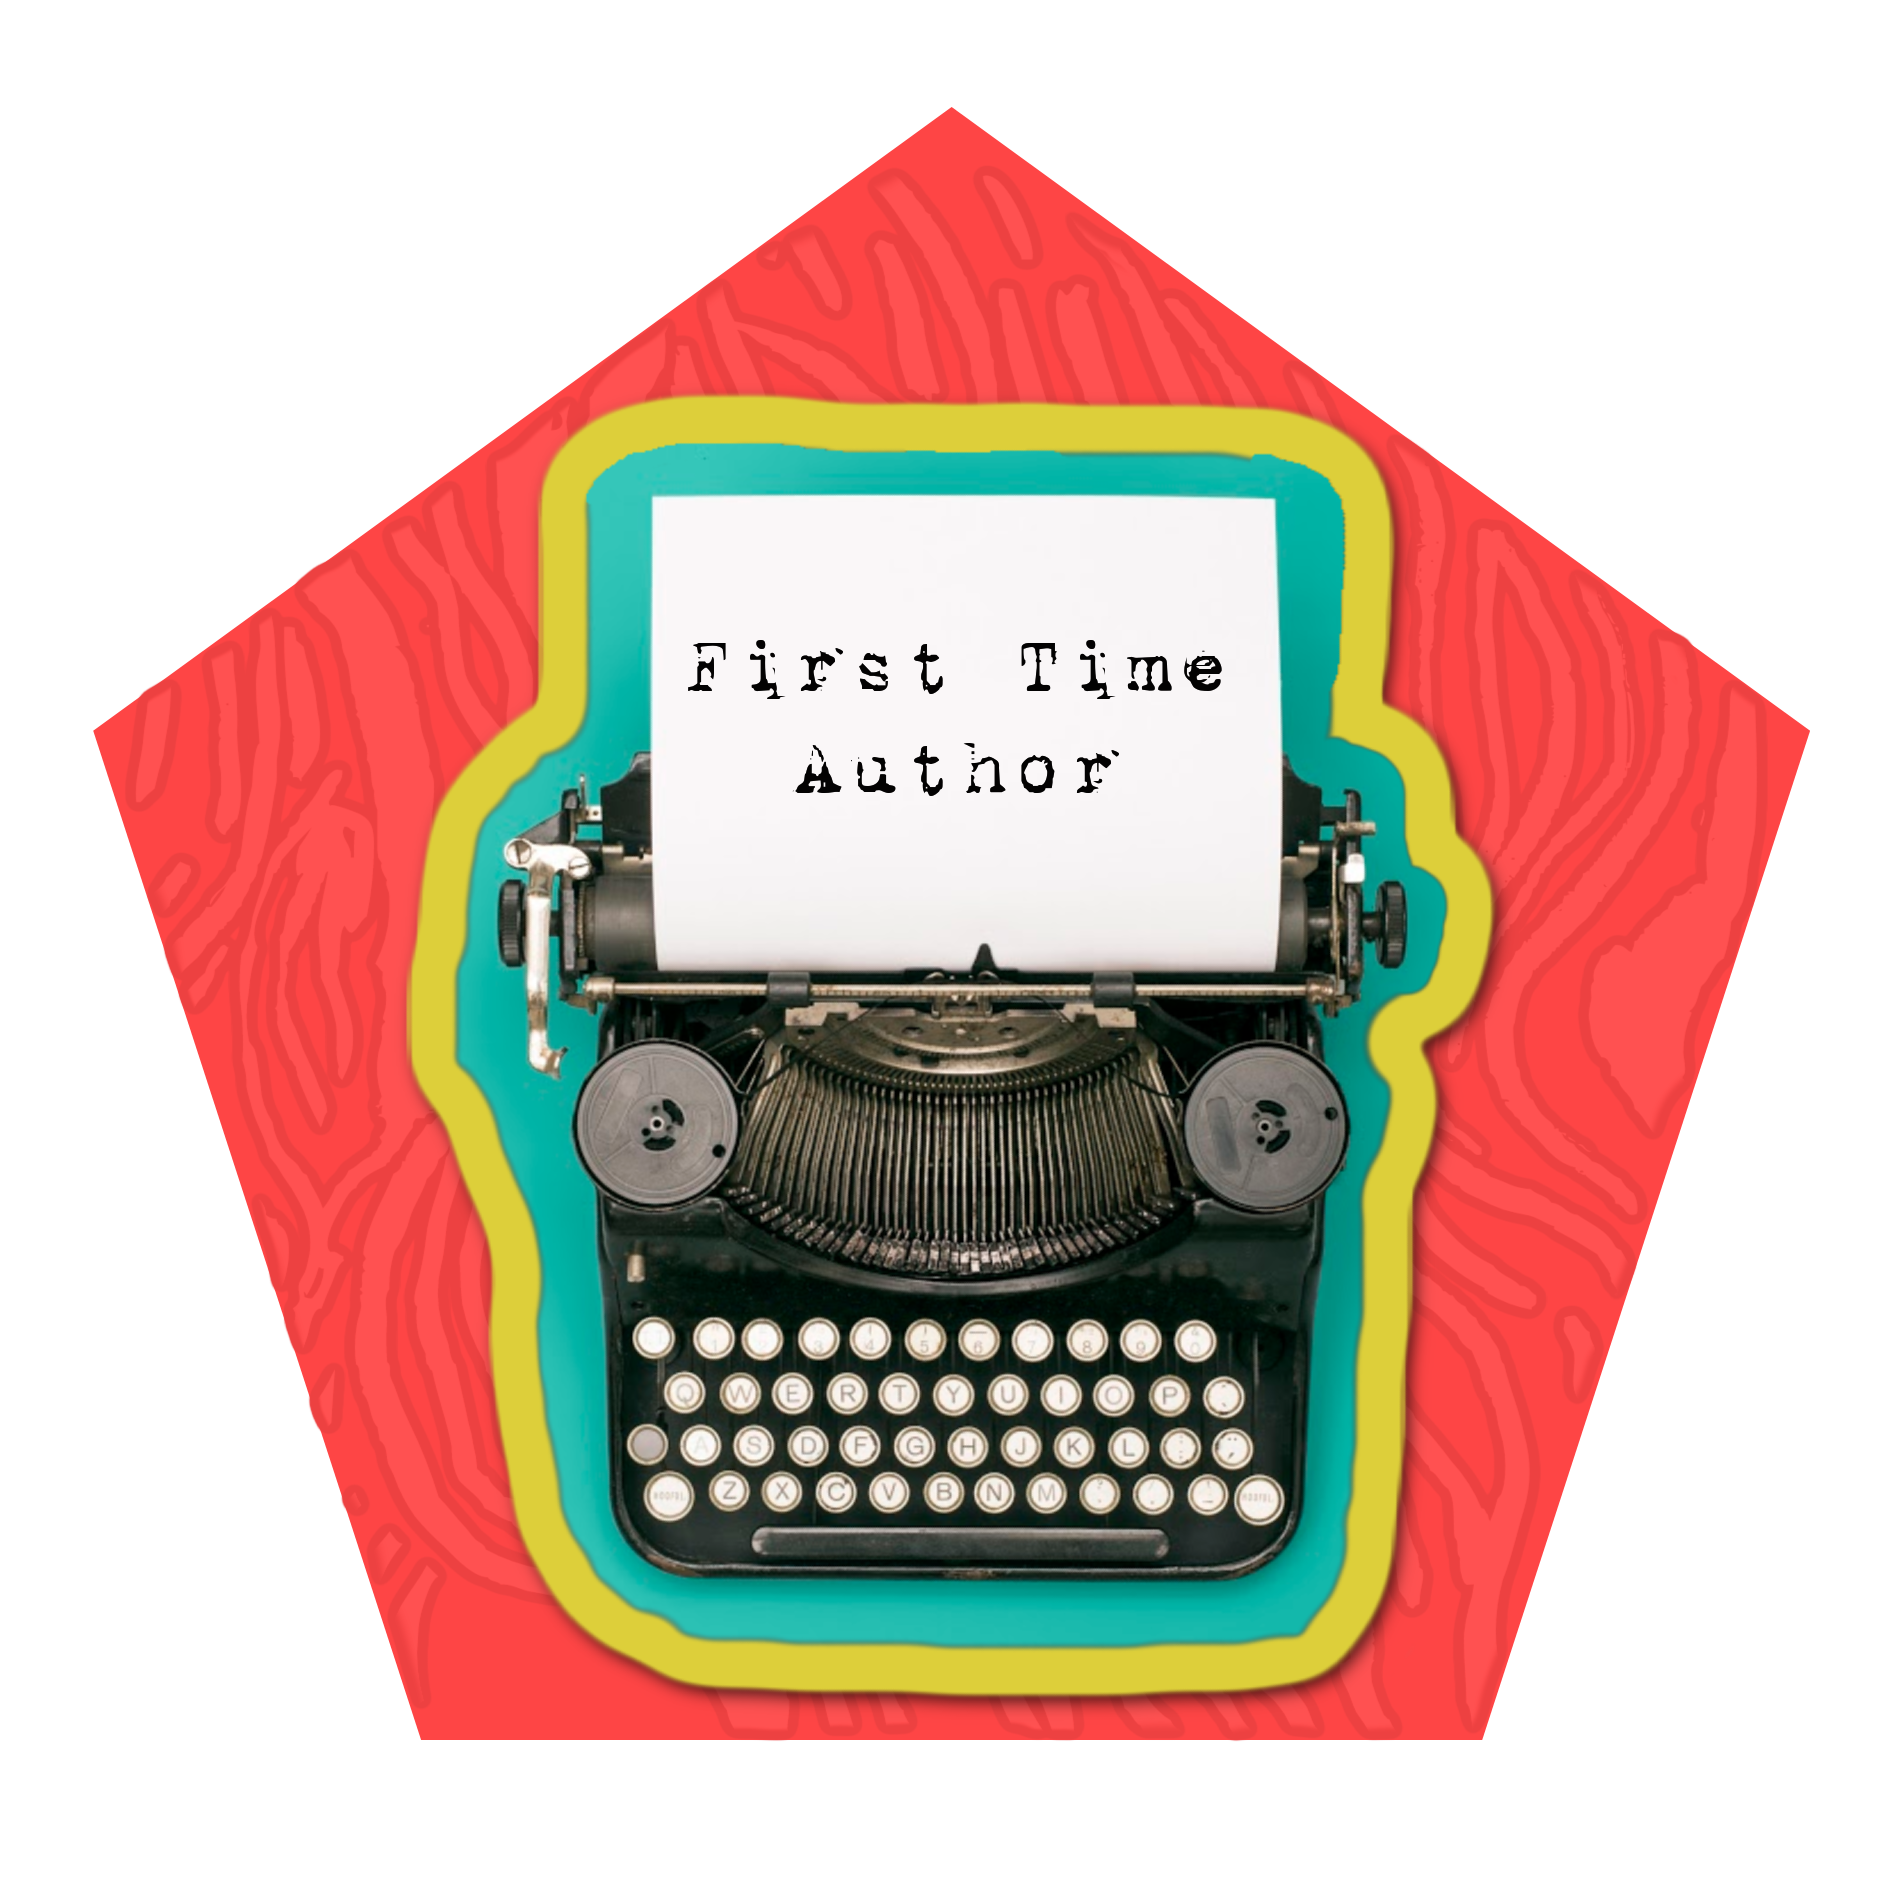 First time author